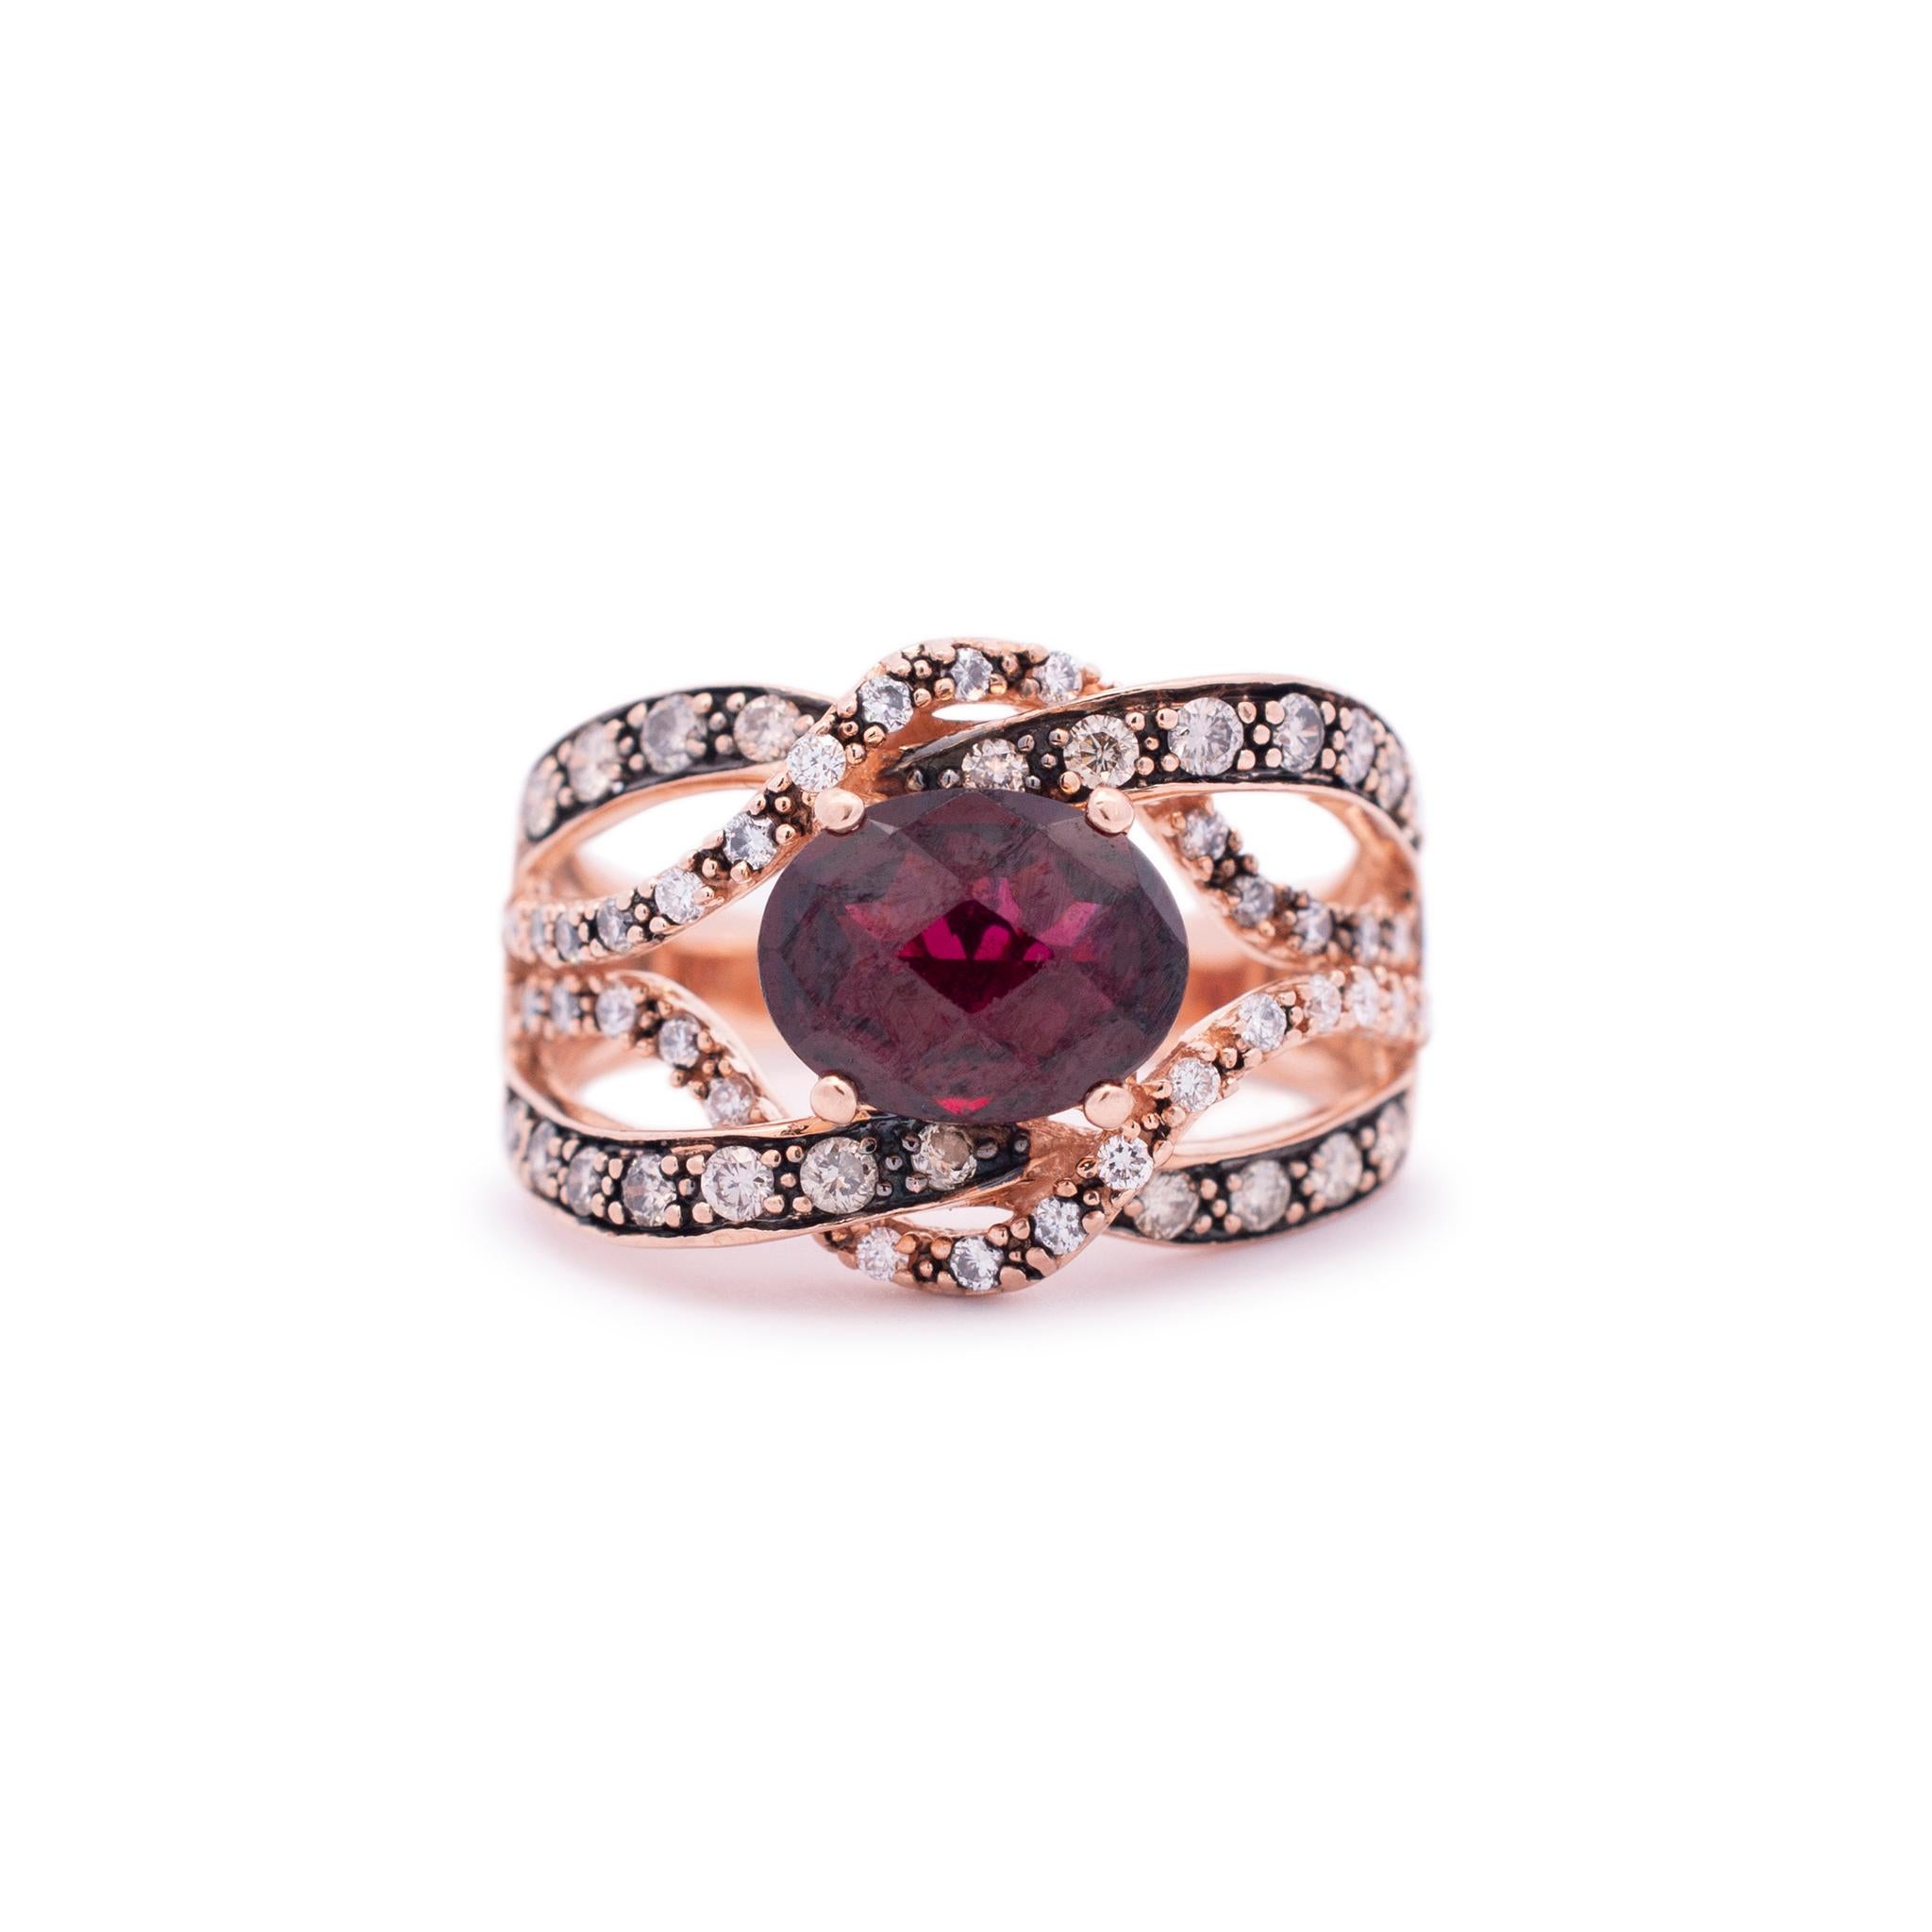 Gender: Ladies

Metal Type: 14K Rose Gold

Size: 6.5

Shank Width: 14.05mm tapering to 2.95mm

Weight: 6.41 Grams

Ladies 14K rose gold diamond and garnet cocktail ring with a soft-square shank. Engraved with 